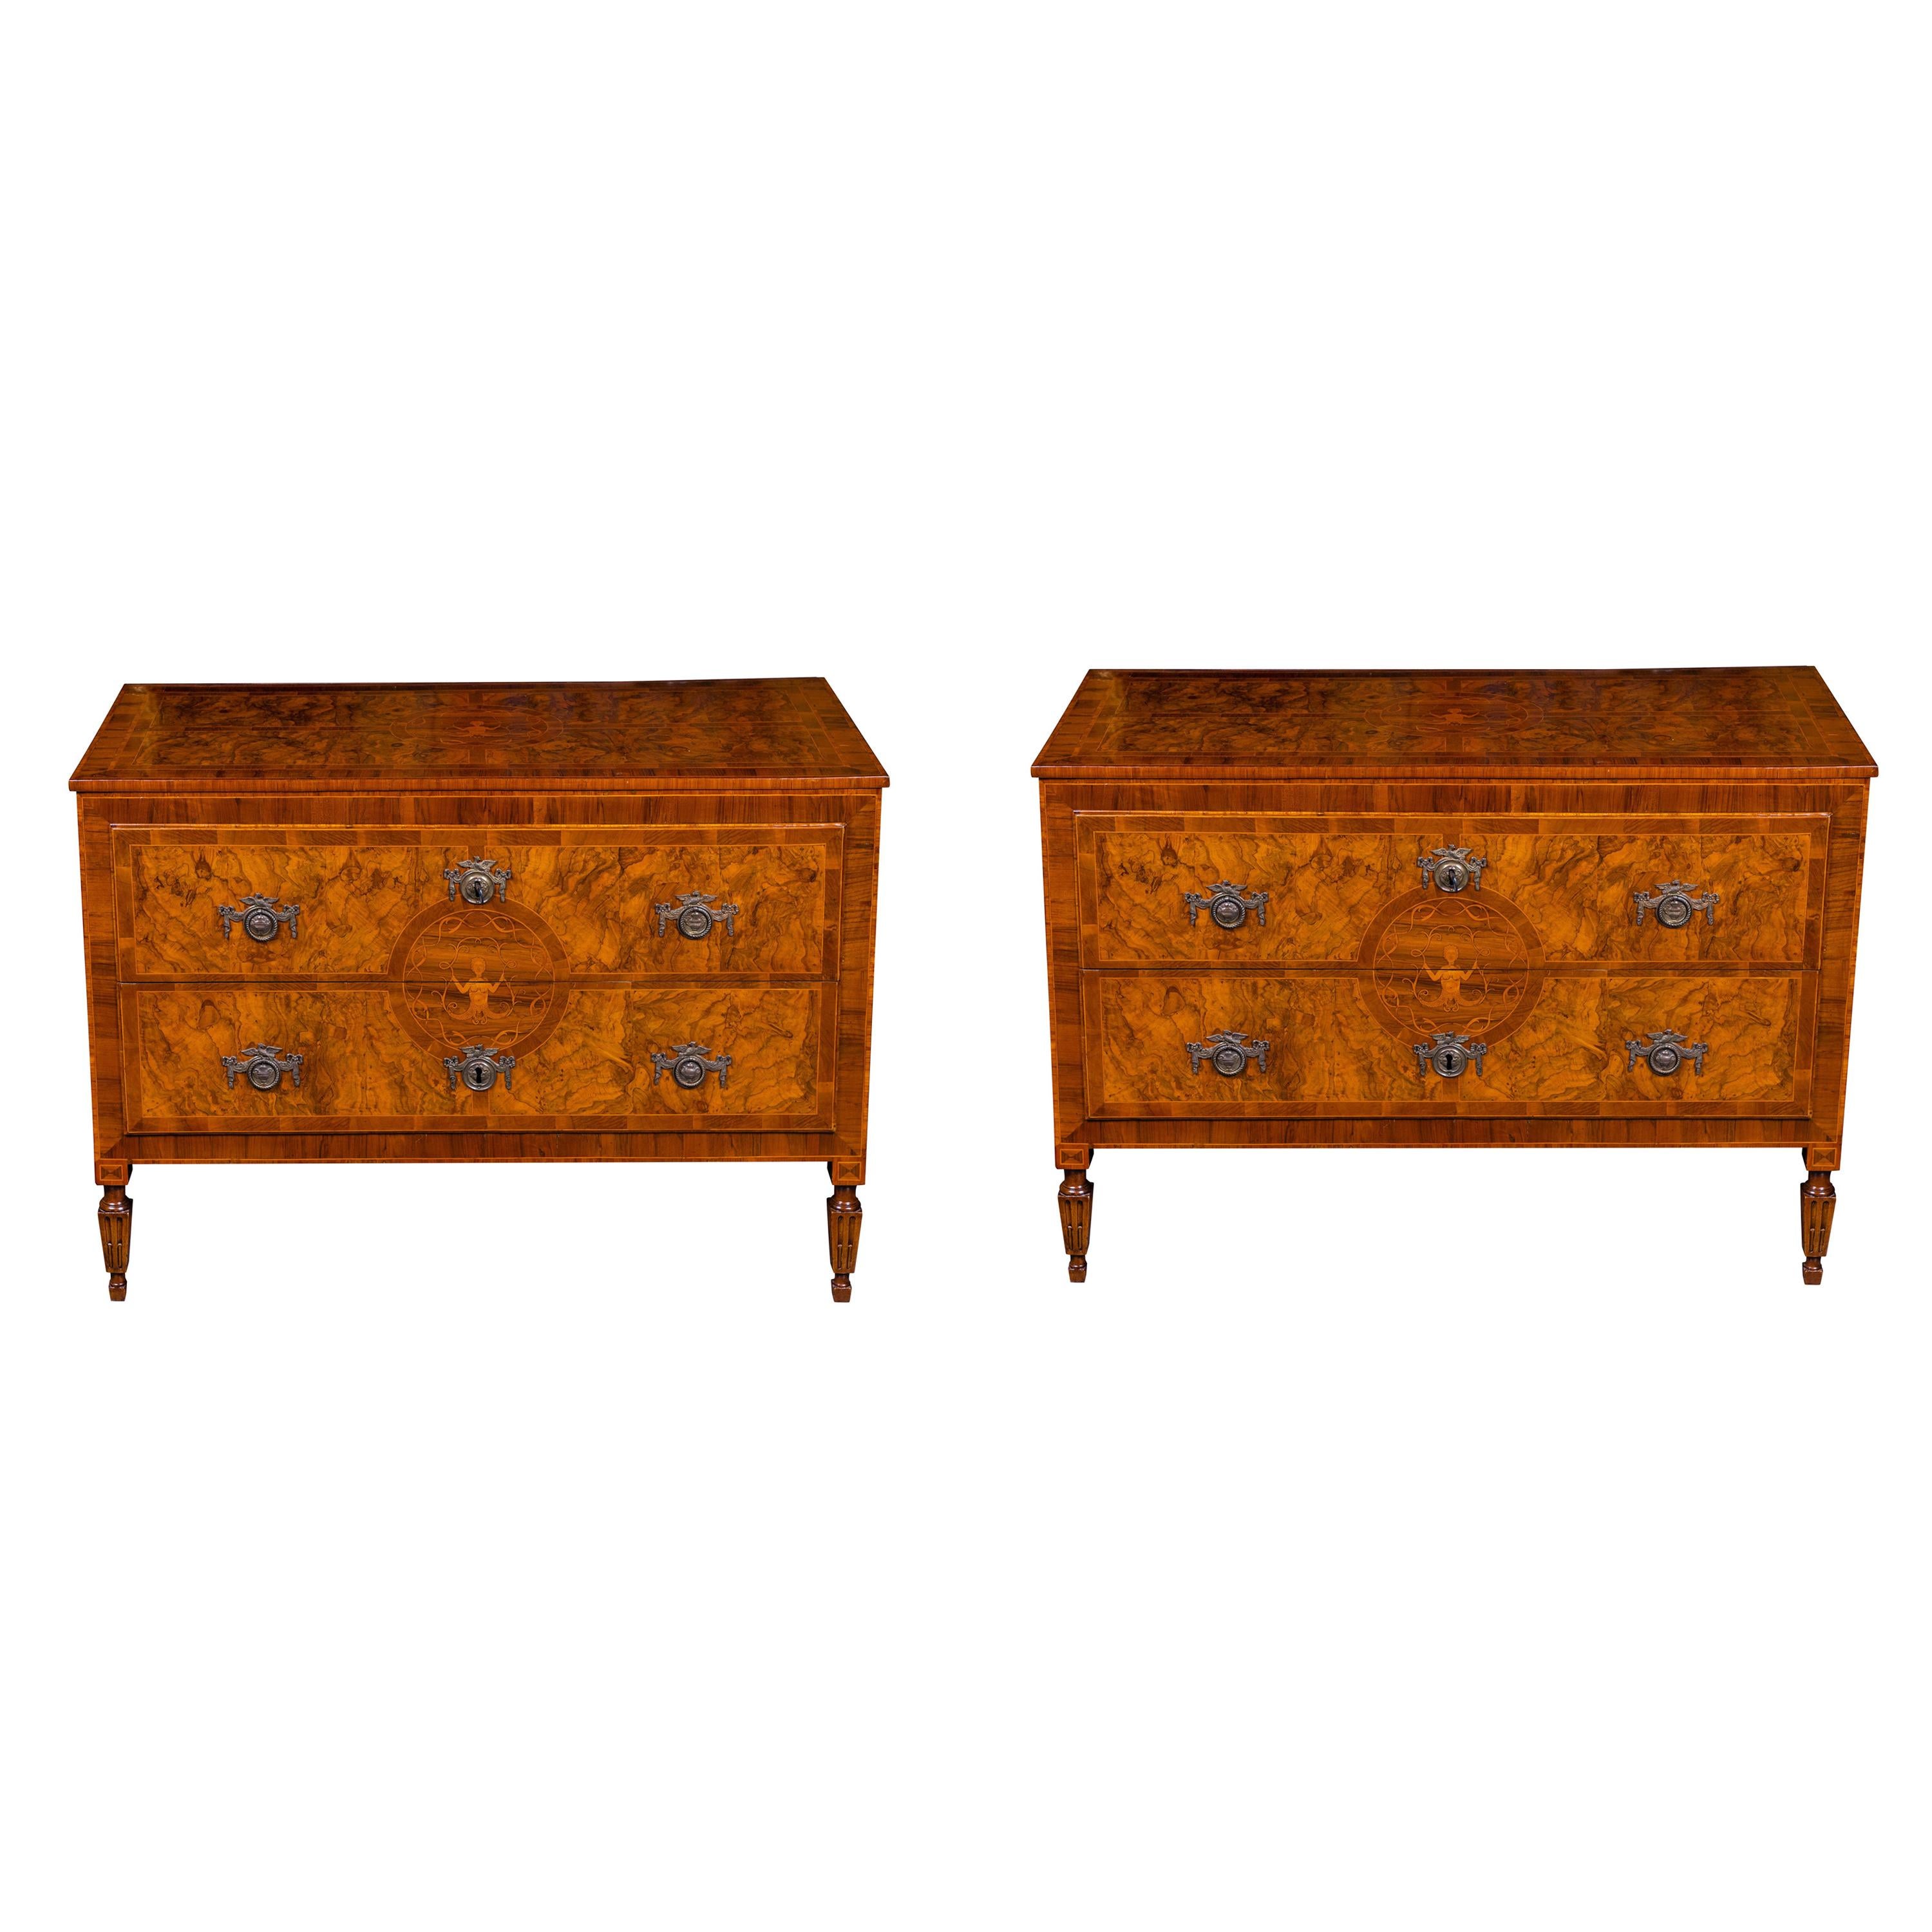 Mated Pair of 18th Century Veneered Commodes For Sale